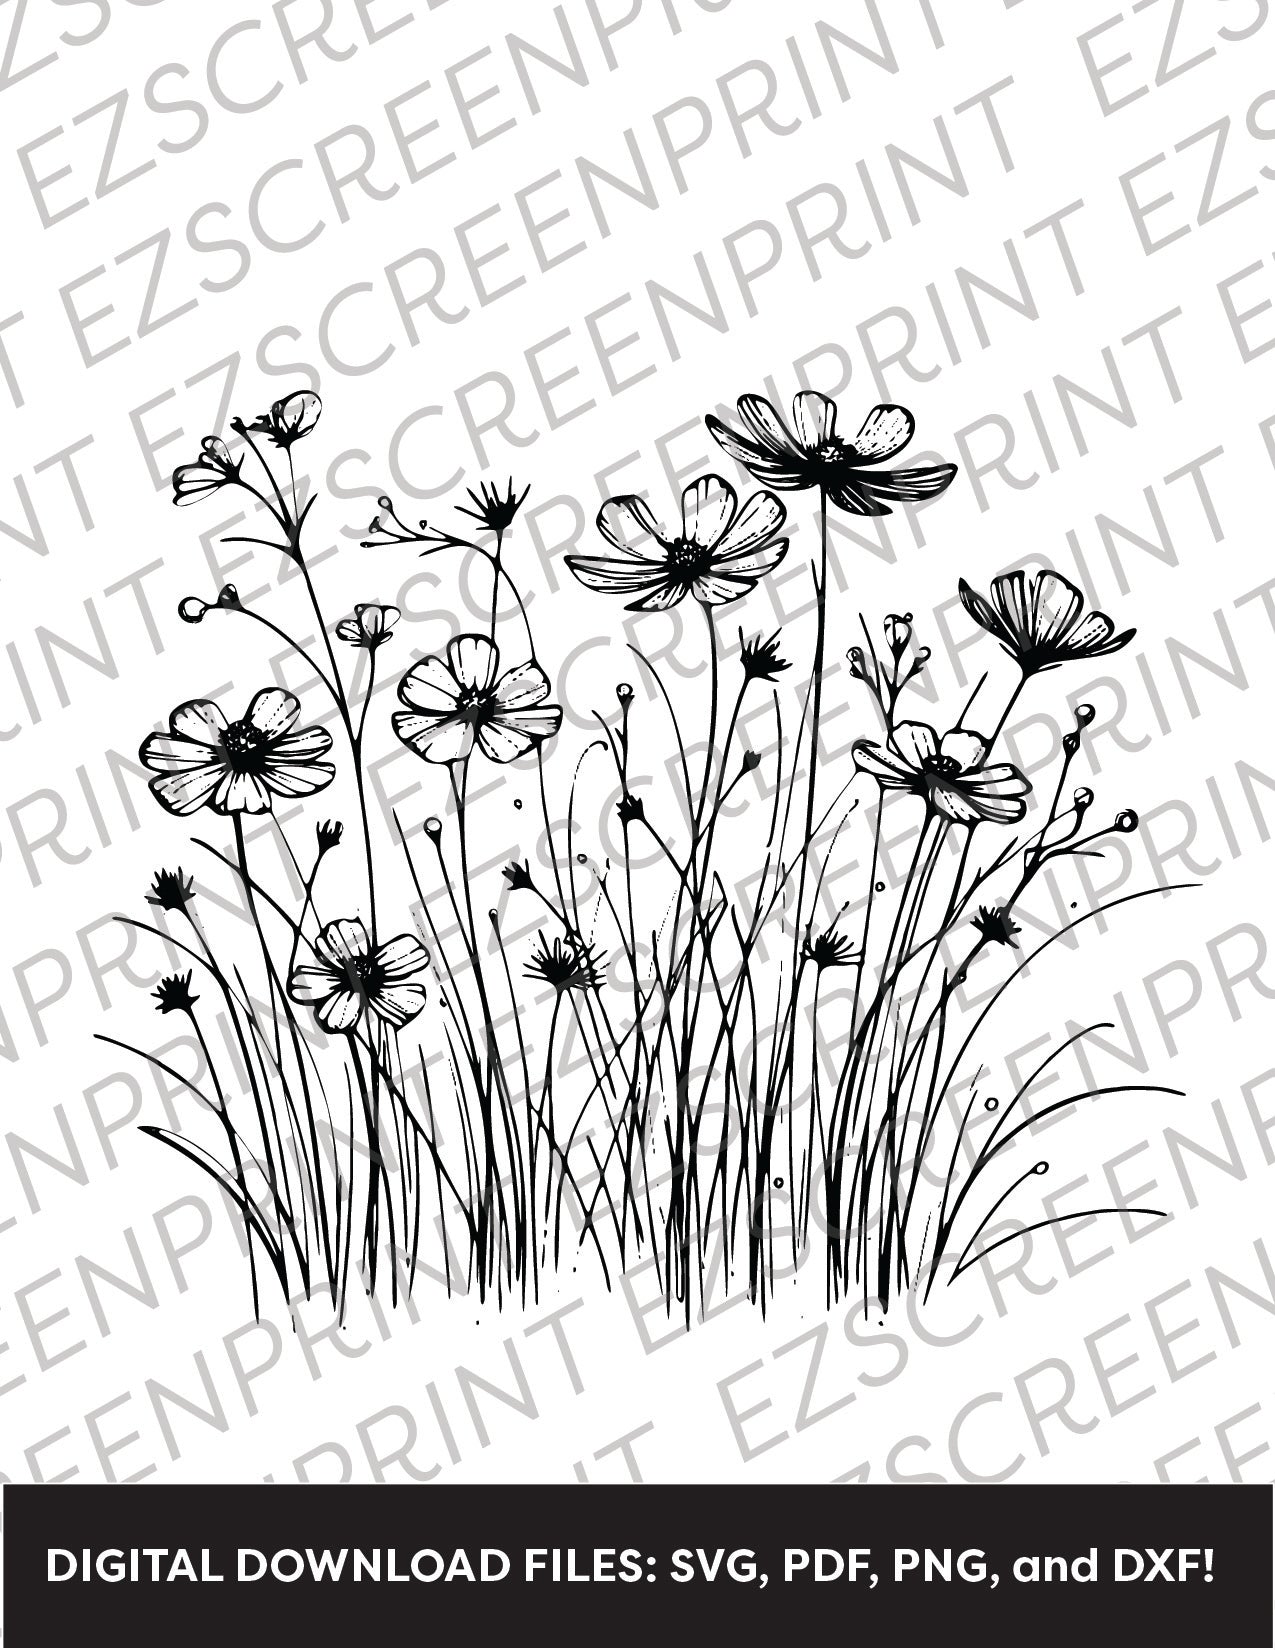 Scratched Wildflowers 2, 8.5"x11" + Digital Download